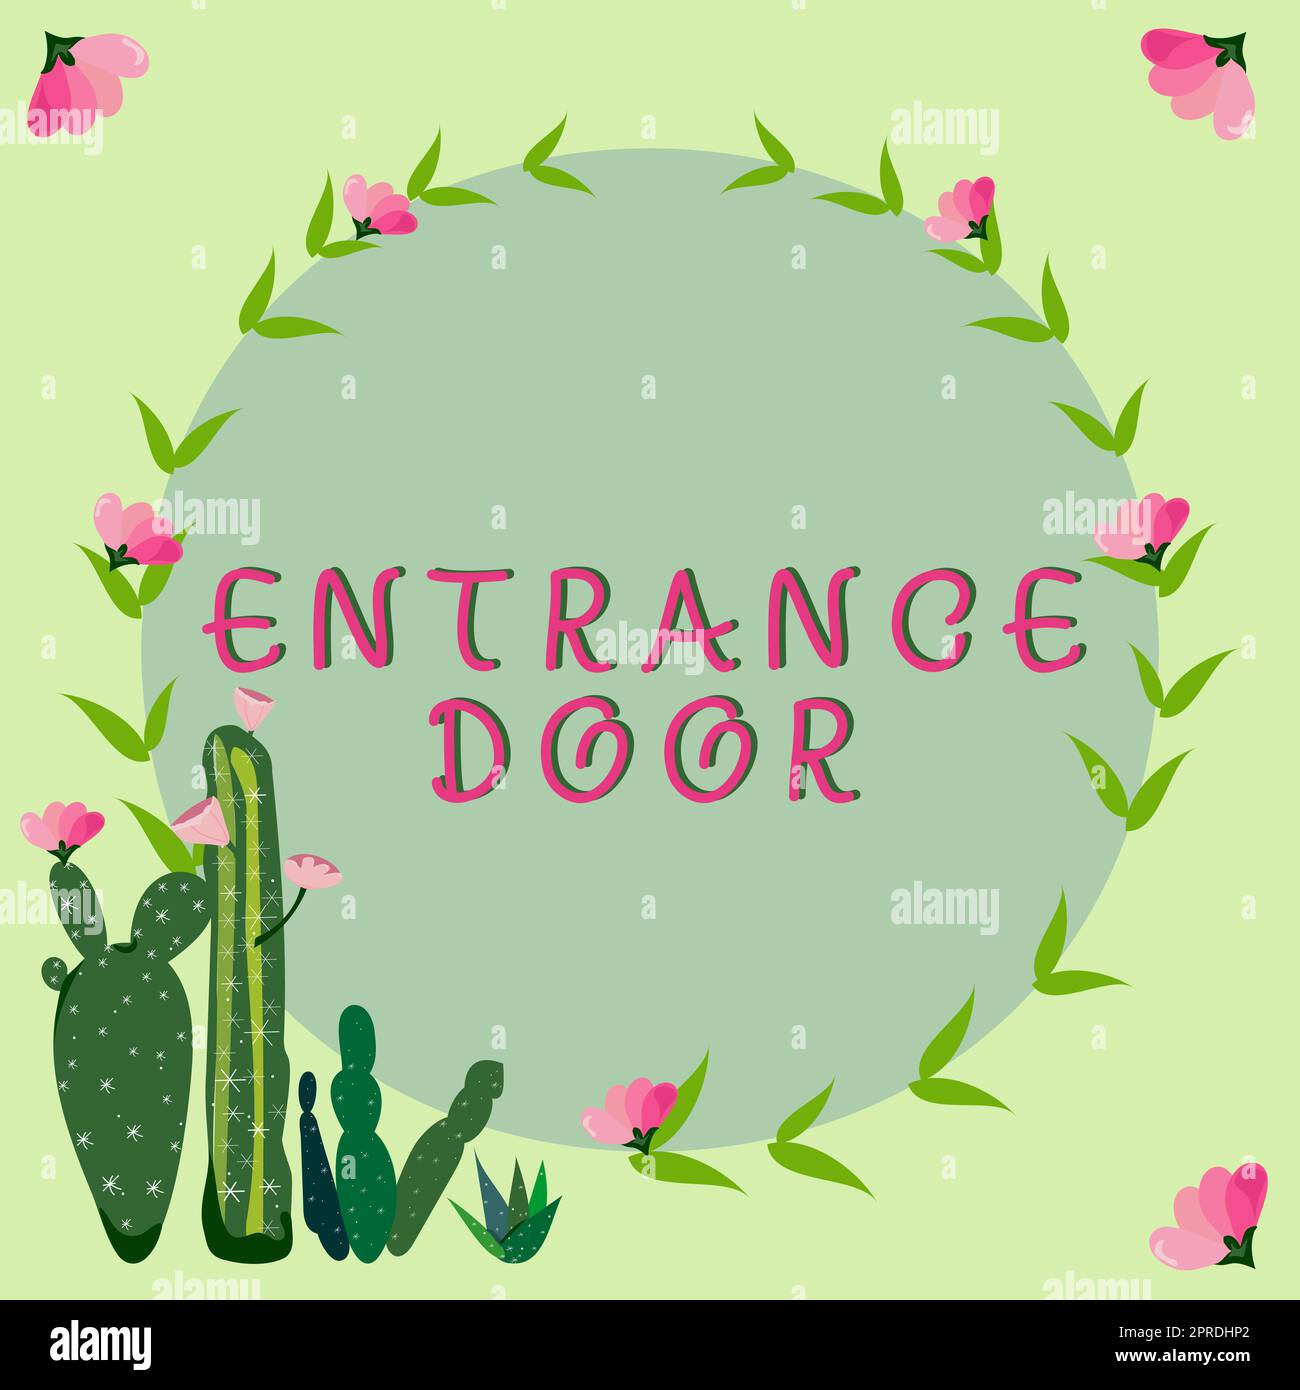 Text caption presenting Entrance Door. Word Written on Way in Doorway Gate Entry Incoming Ingress Passage Portal Frame Decorated With Colorful Flowers And Foliage Arranged Harmoniously. Stock Photo